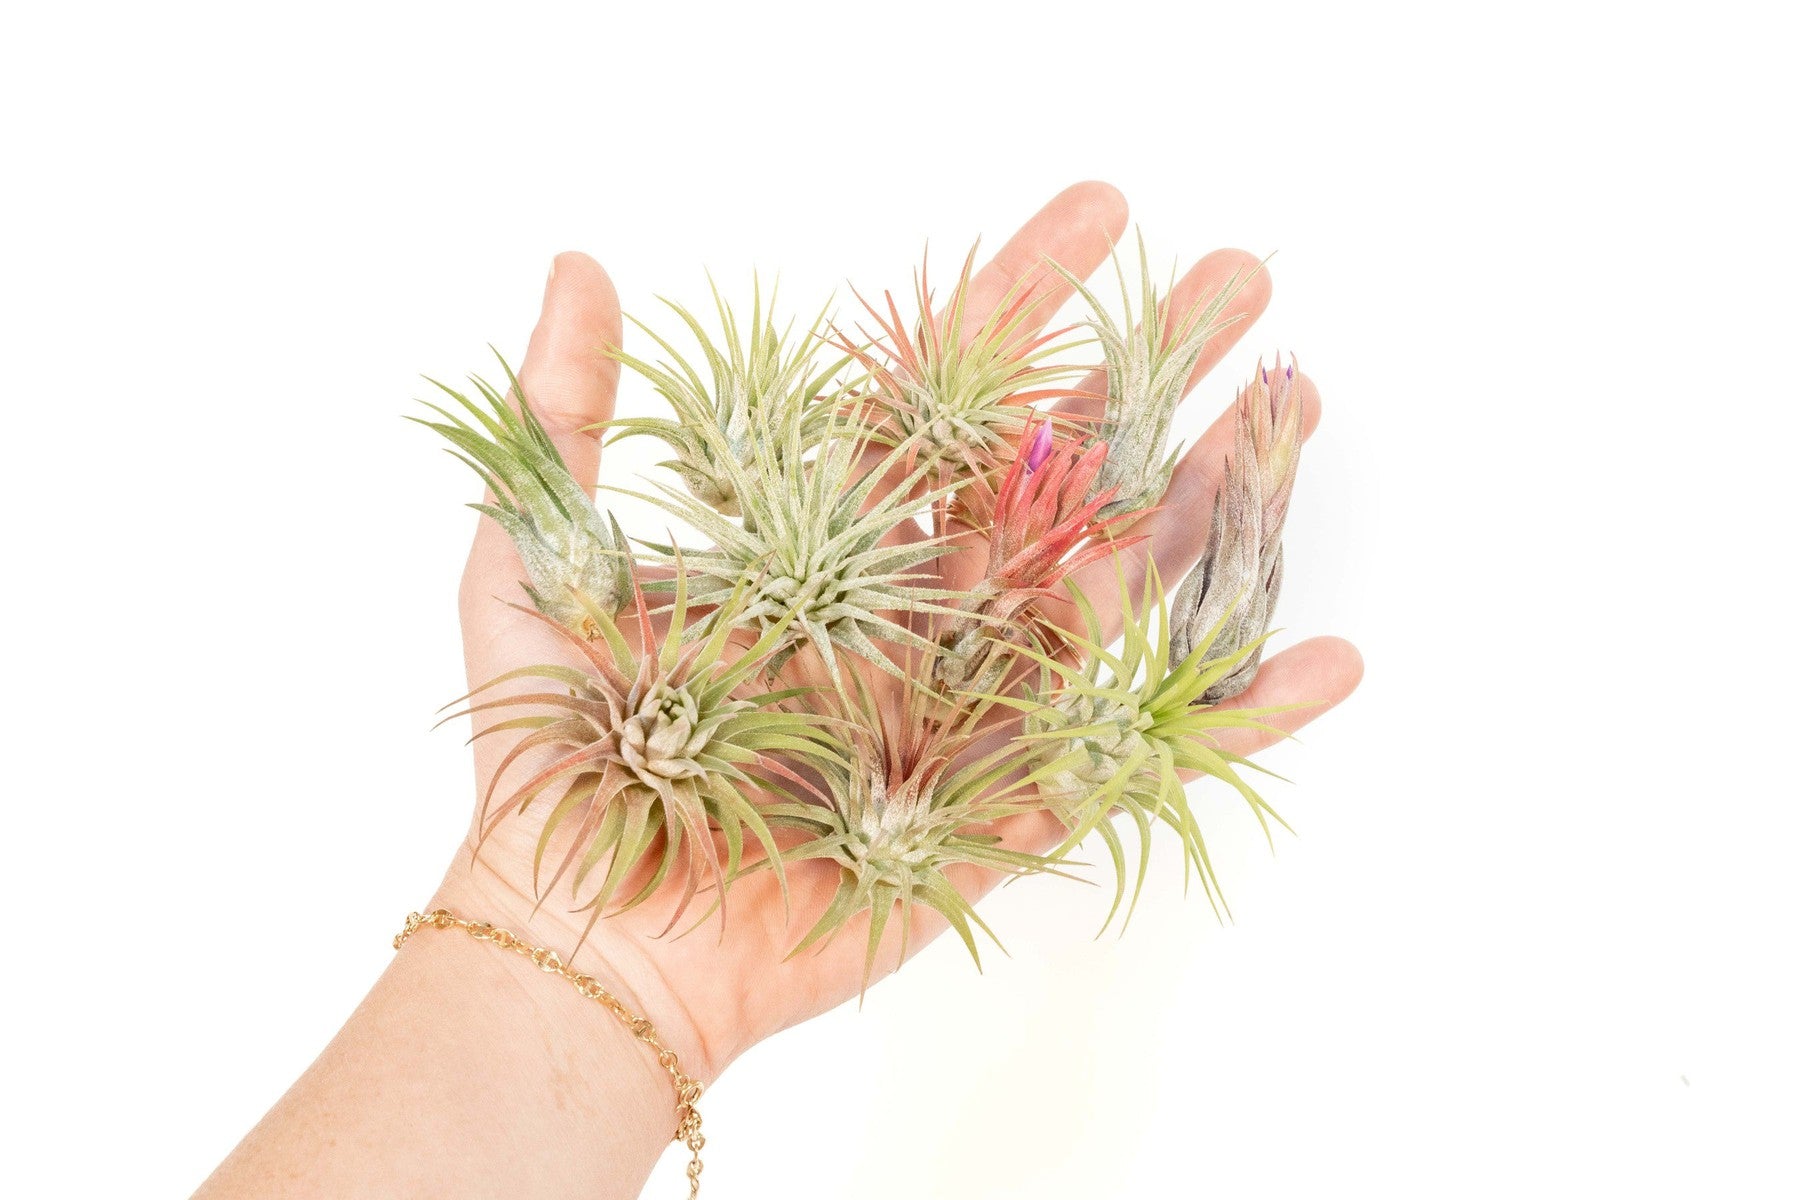 SALE - Mini Tillandsia Ionantha Air Plant Pups - Sets of 5, 10 or 15 - 40% Off-airplant-The Succulent Source